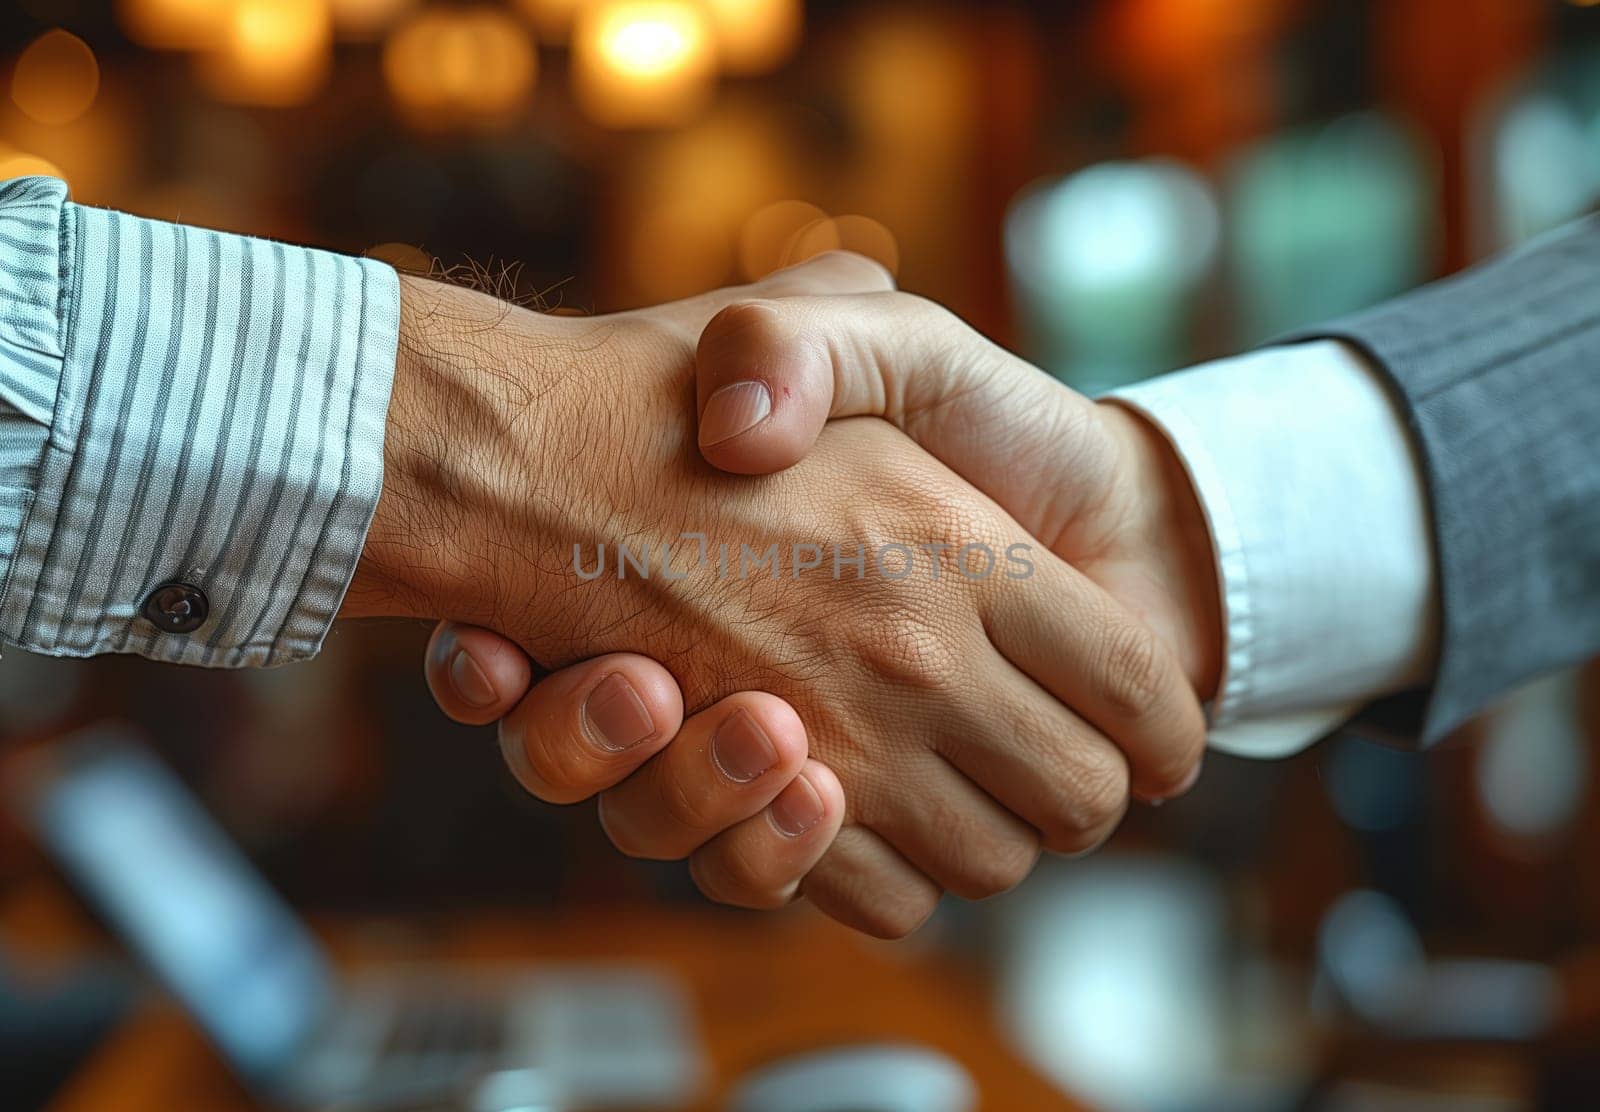 Two men exchange a handshake across a table as a formal greeting gesture by richwolf